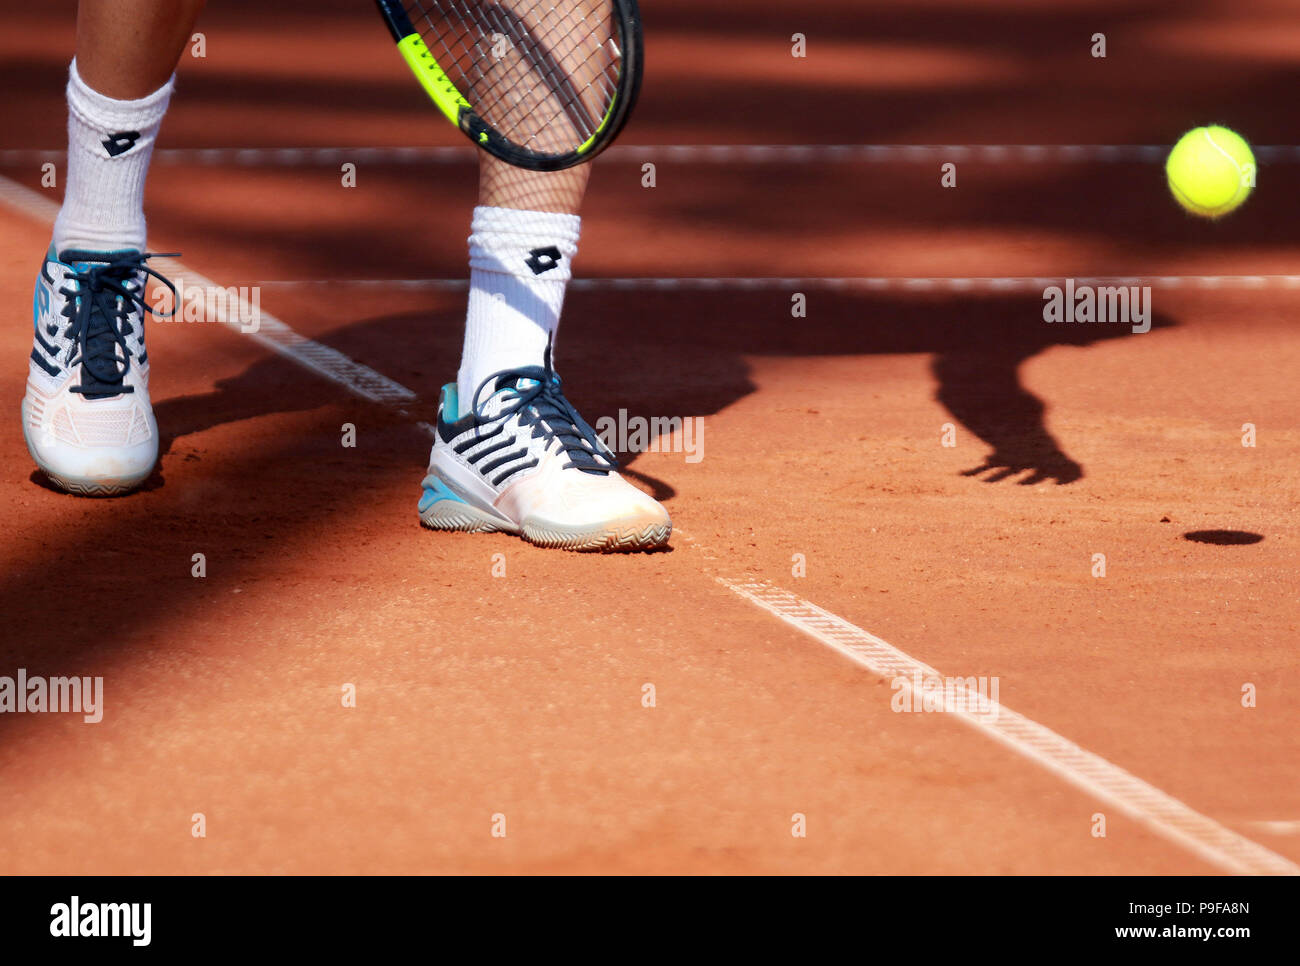 Umag, Croatia. 18th July 2018. CROATIA, Umag: The shadow of Marco Cecchinato of Italy during the singles match Vesely v Cecchinato at the ATP 29th Plava laguna Croatia Open Umag tournament at the at the Goran Ivanisevic ATP Stadium, on July 18, 2018 in Umag. Credit: Andrea Spinelli/Alamy Live News Stock Photo